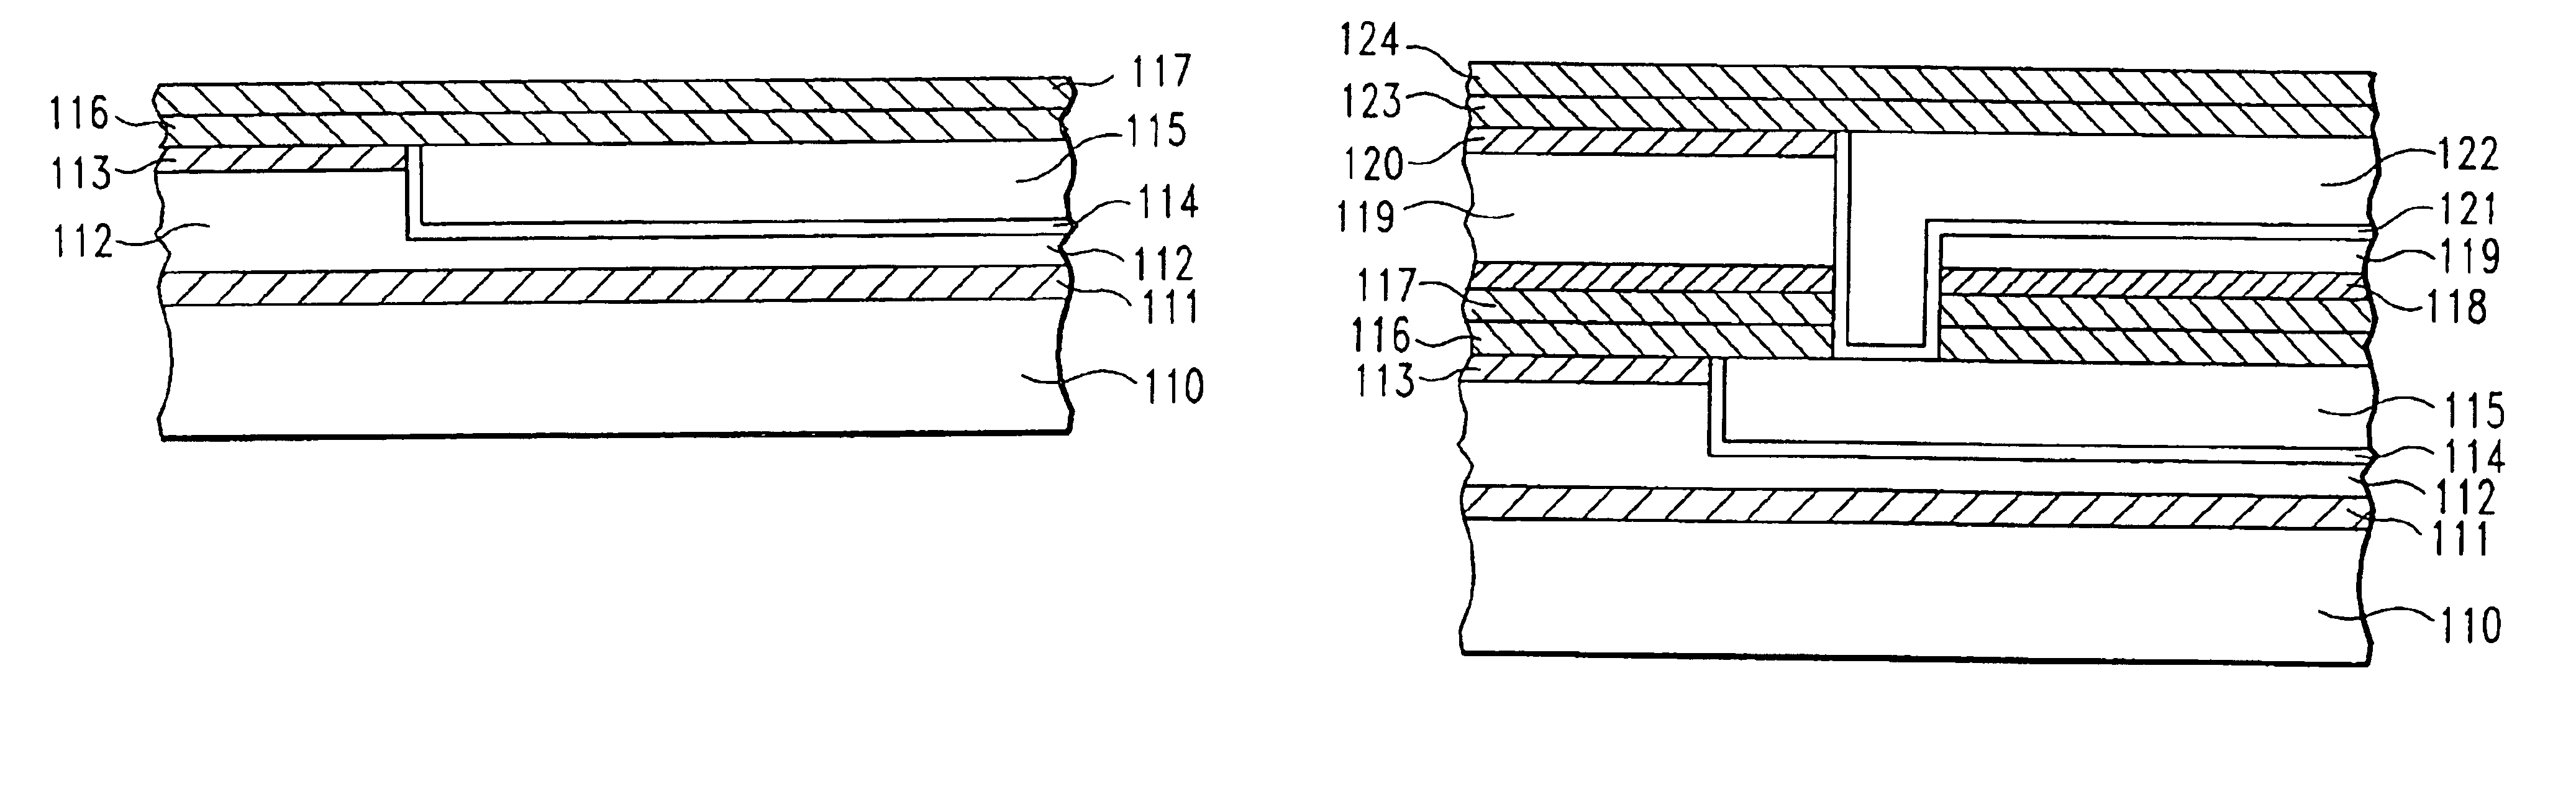 Bilayer HDP CVD/PE CVD cap in advanced BEOL interconnect structures and method thereof